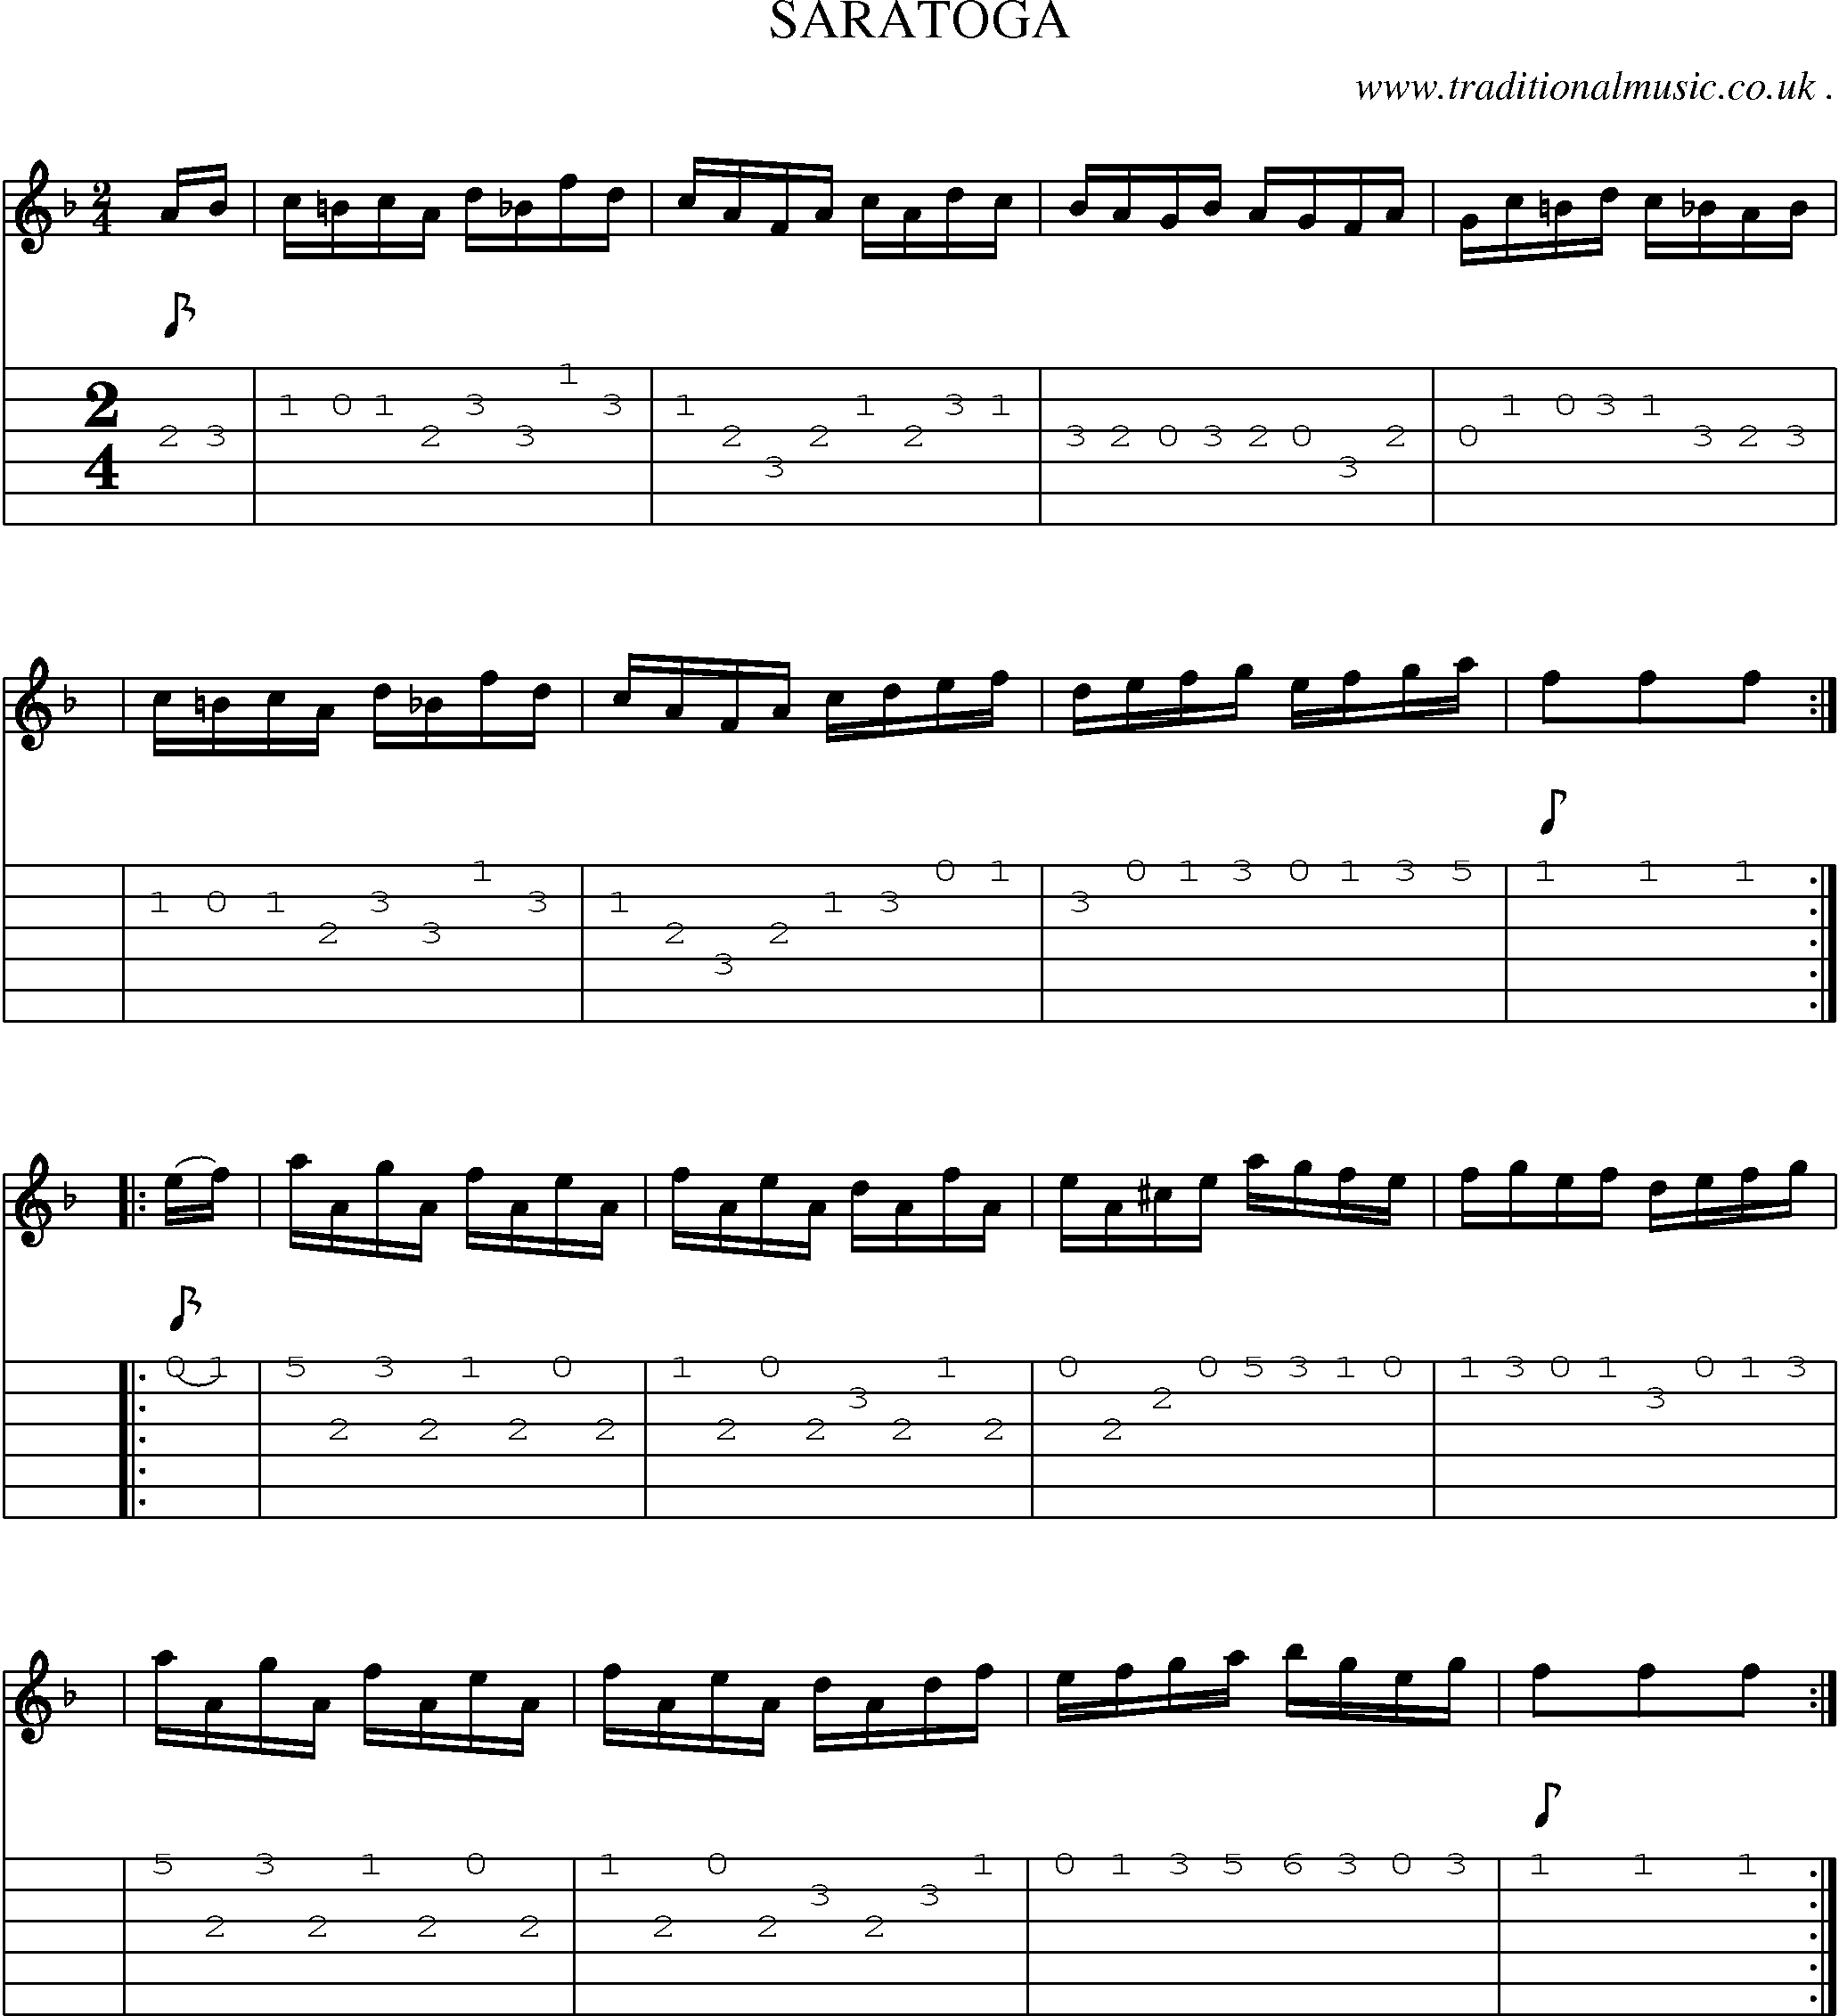 Sheet-Music and Guitar Tabs for Saratoga